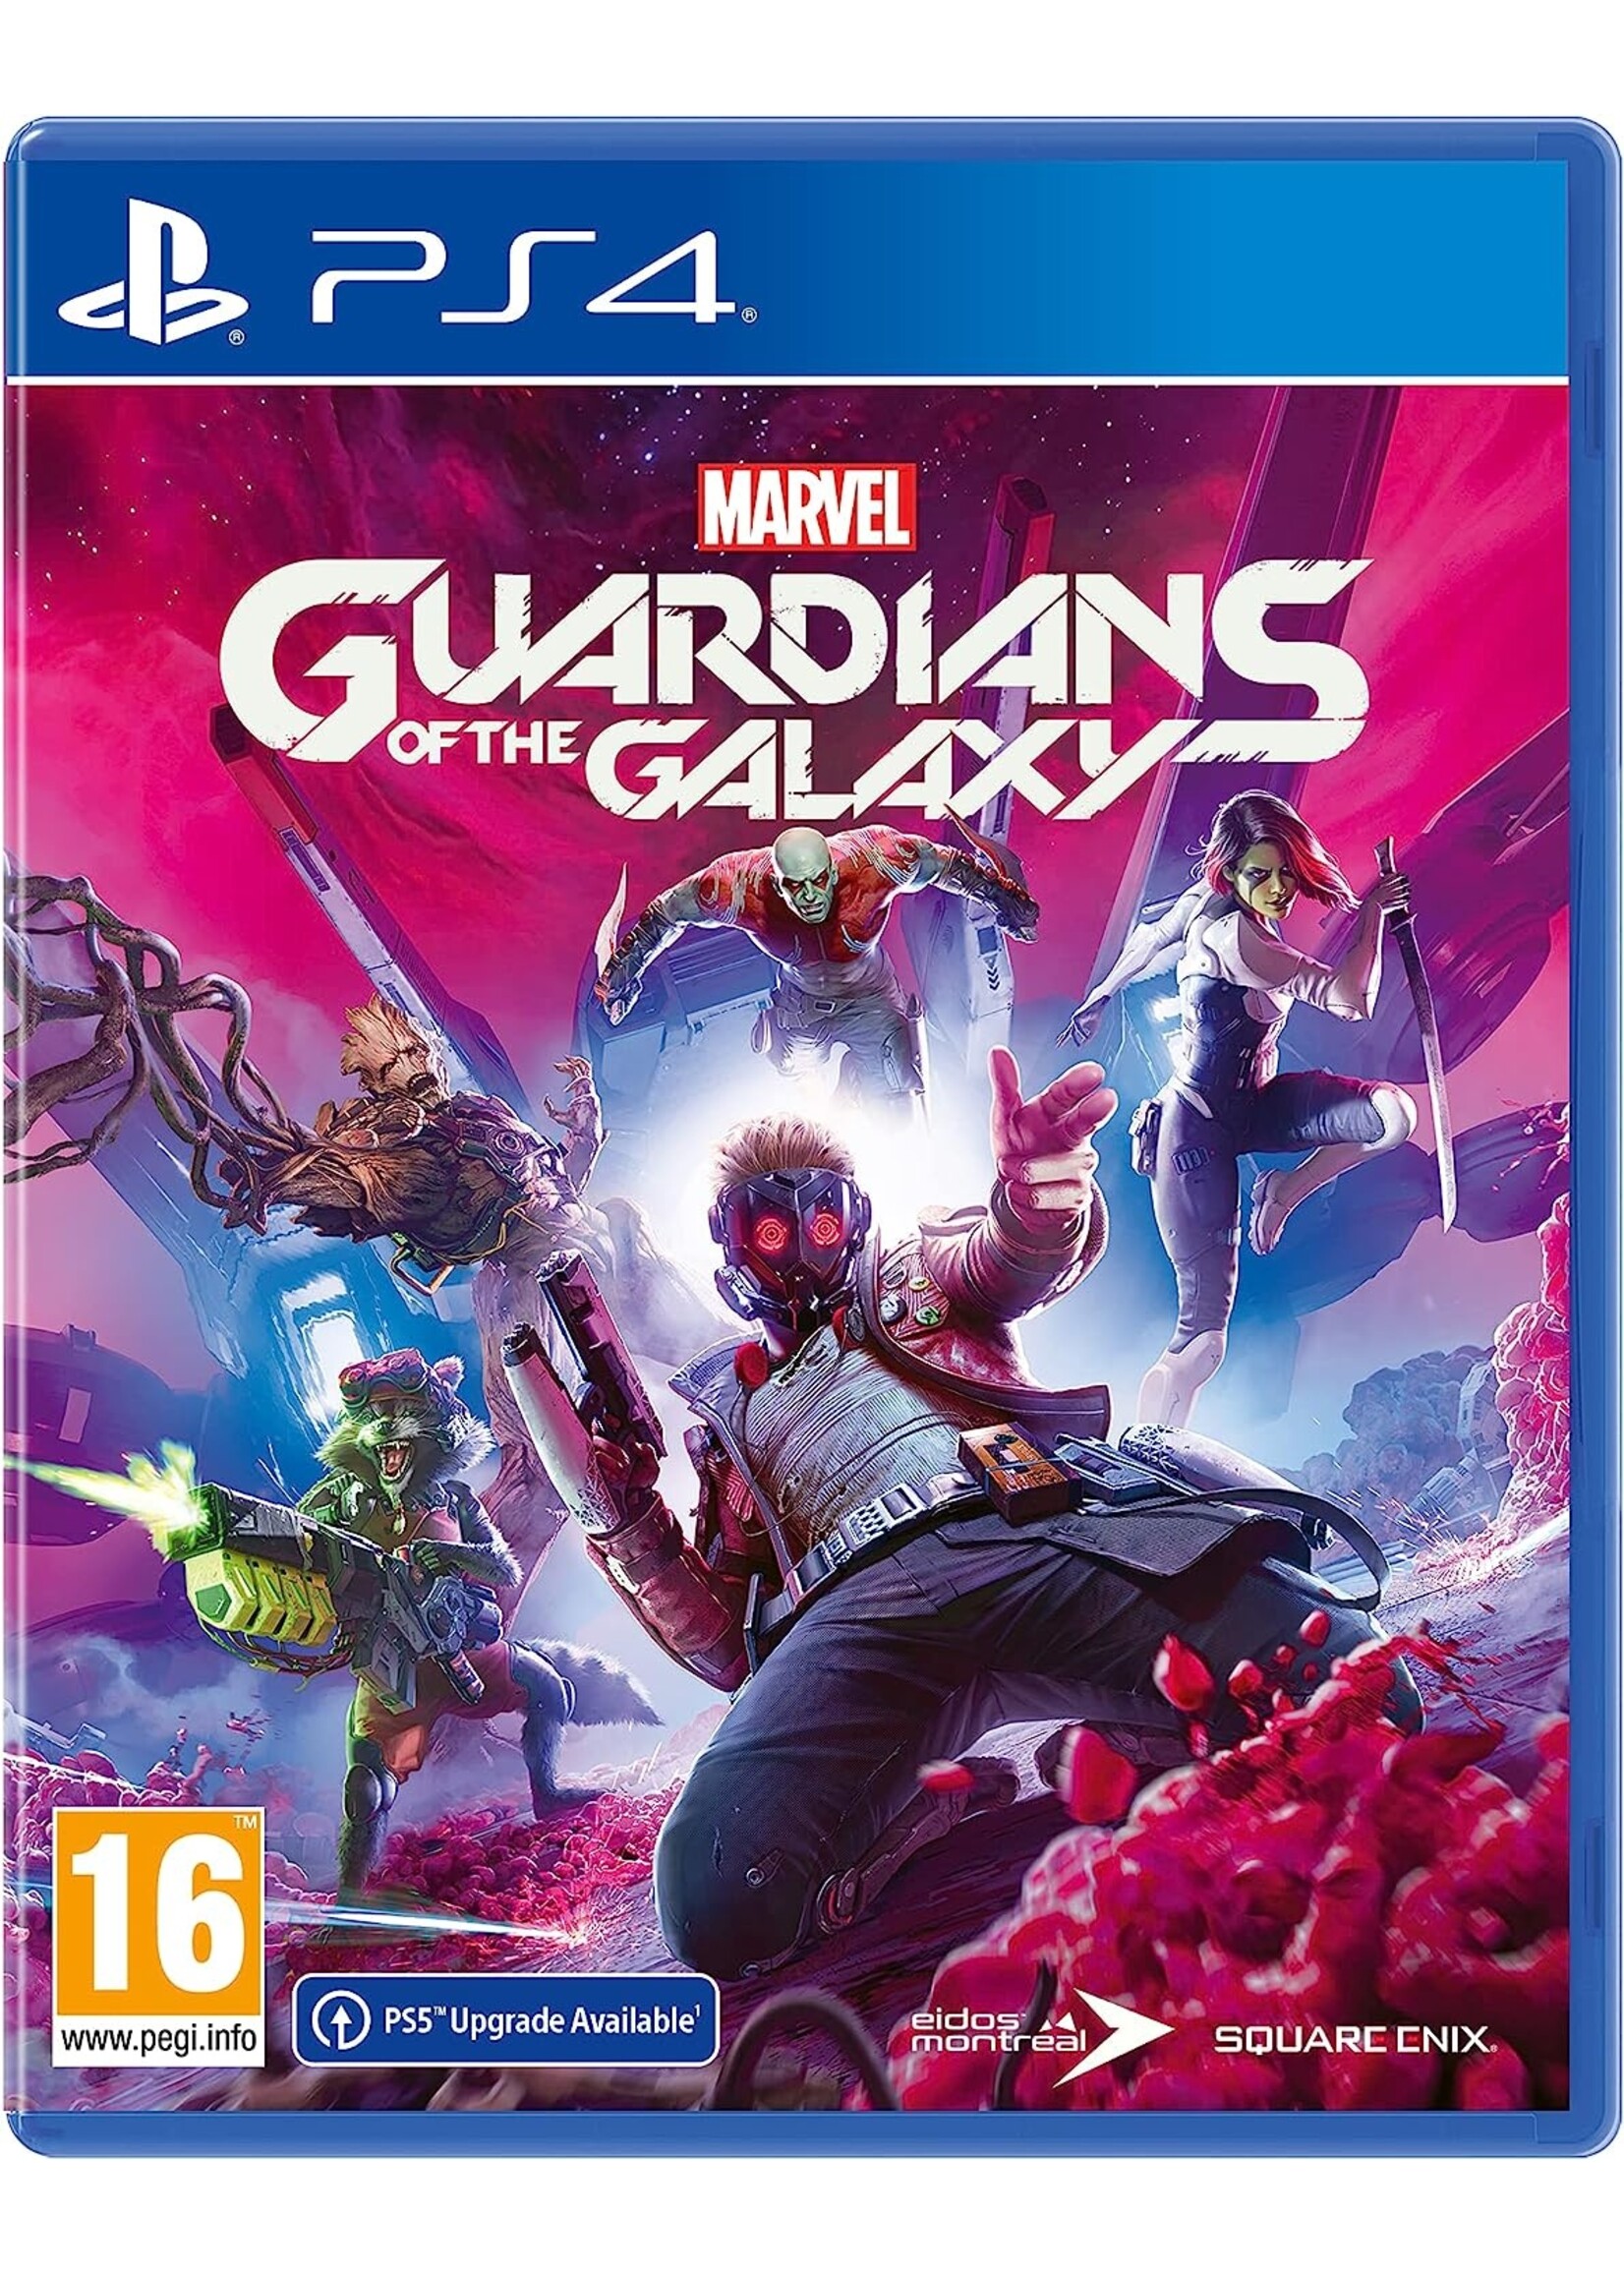 Marvel Avengers Guardians of the Galaxy- PS4 NEW